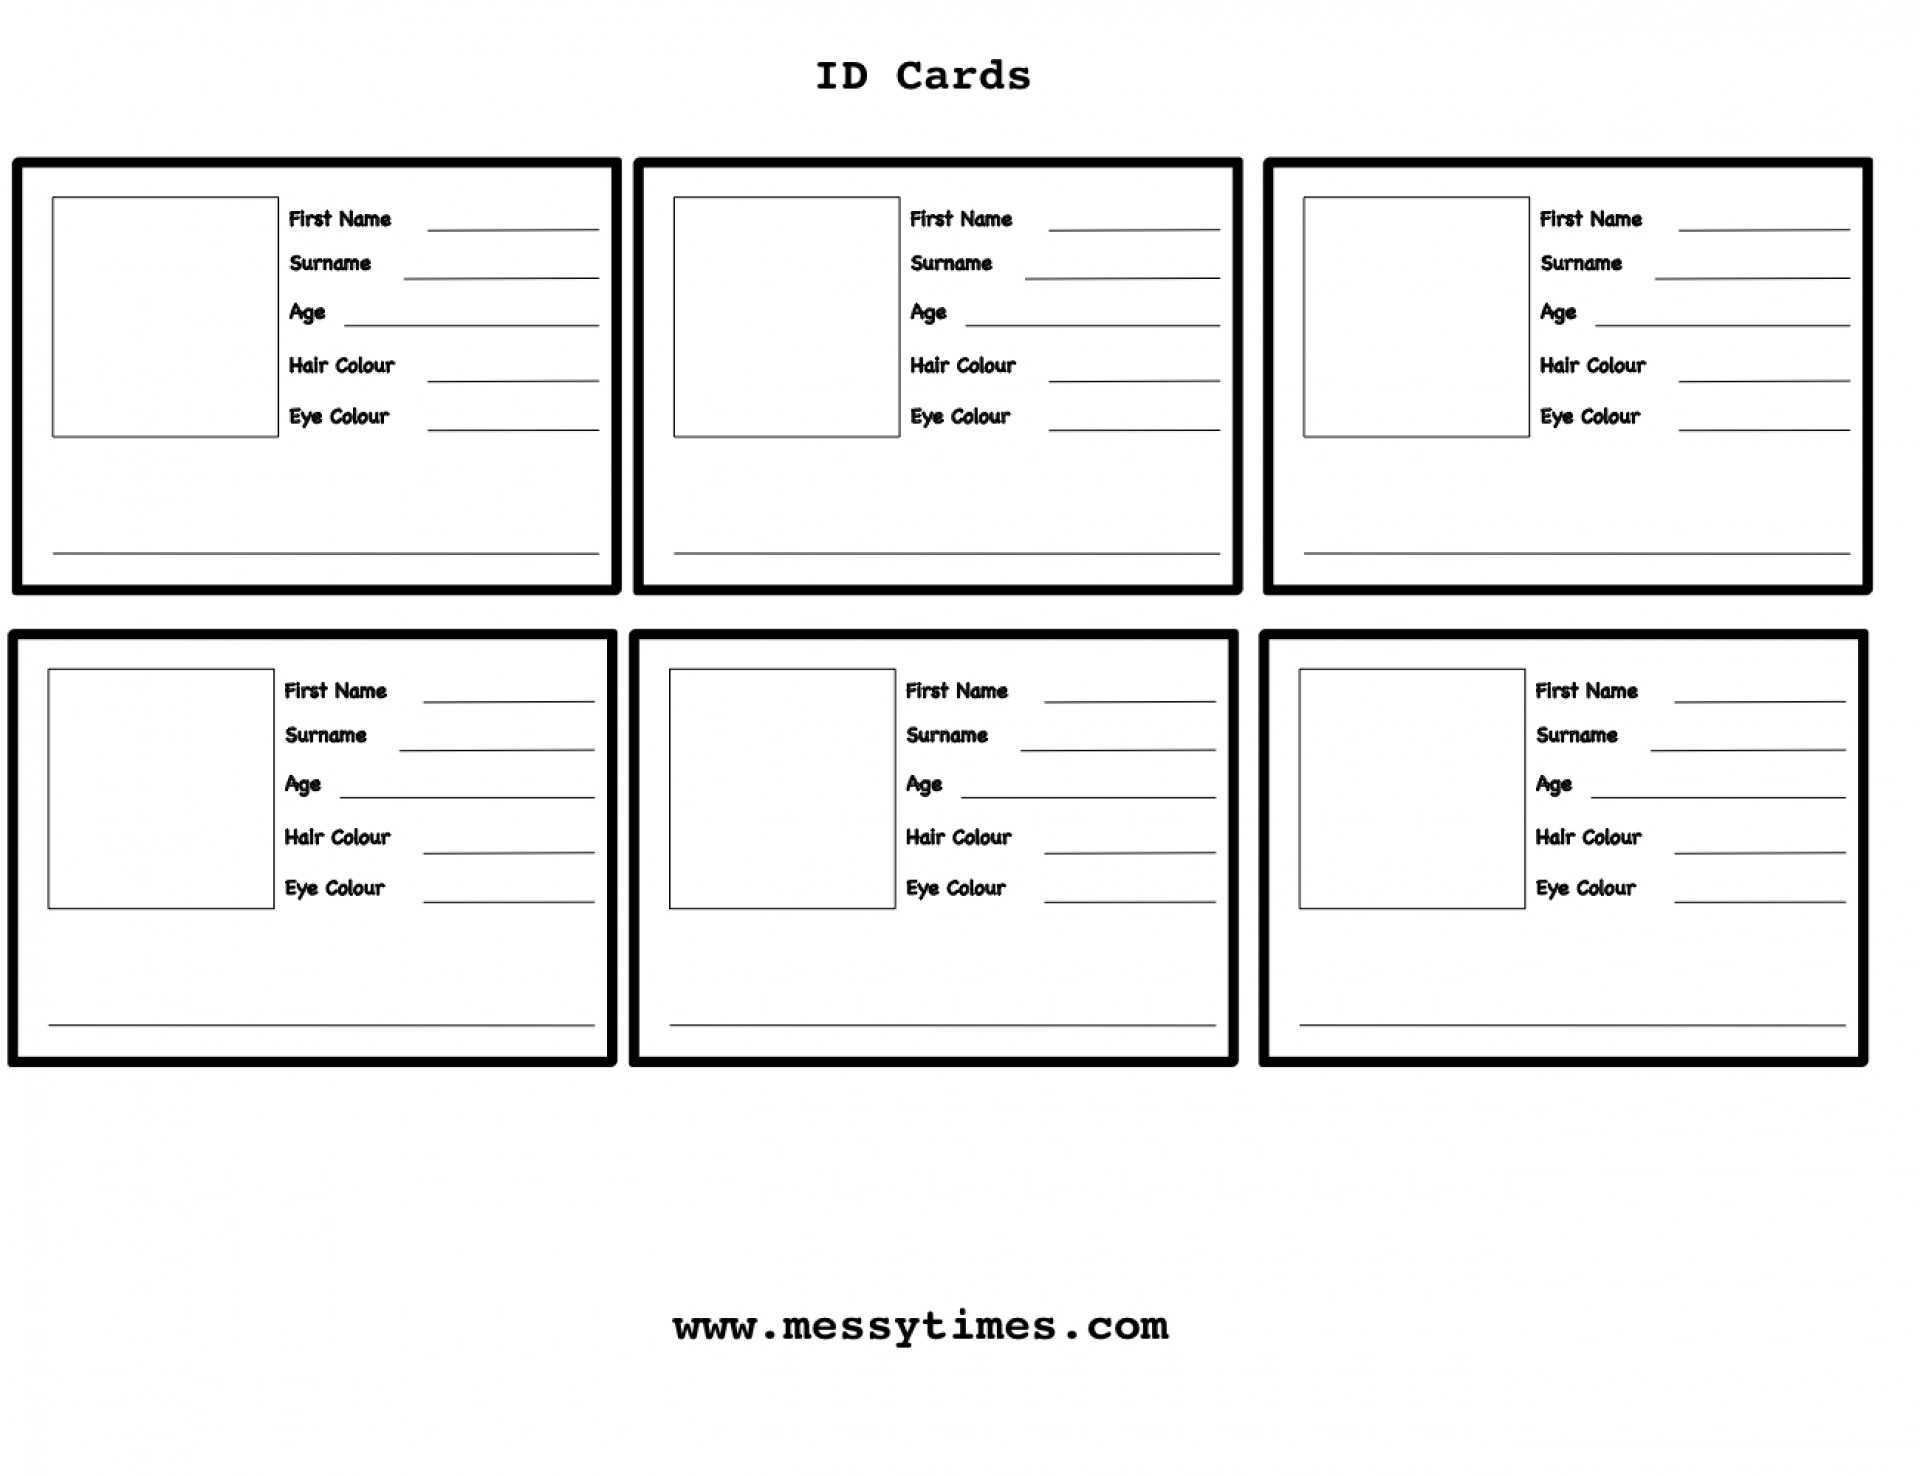 id-card-template-for-kids